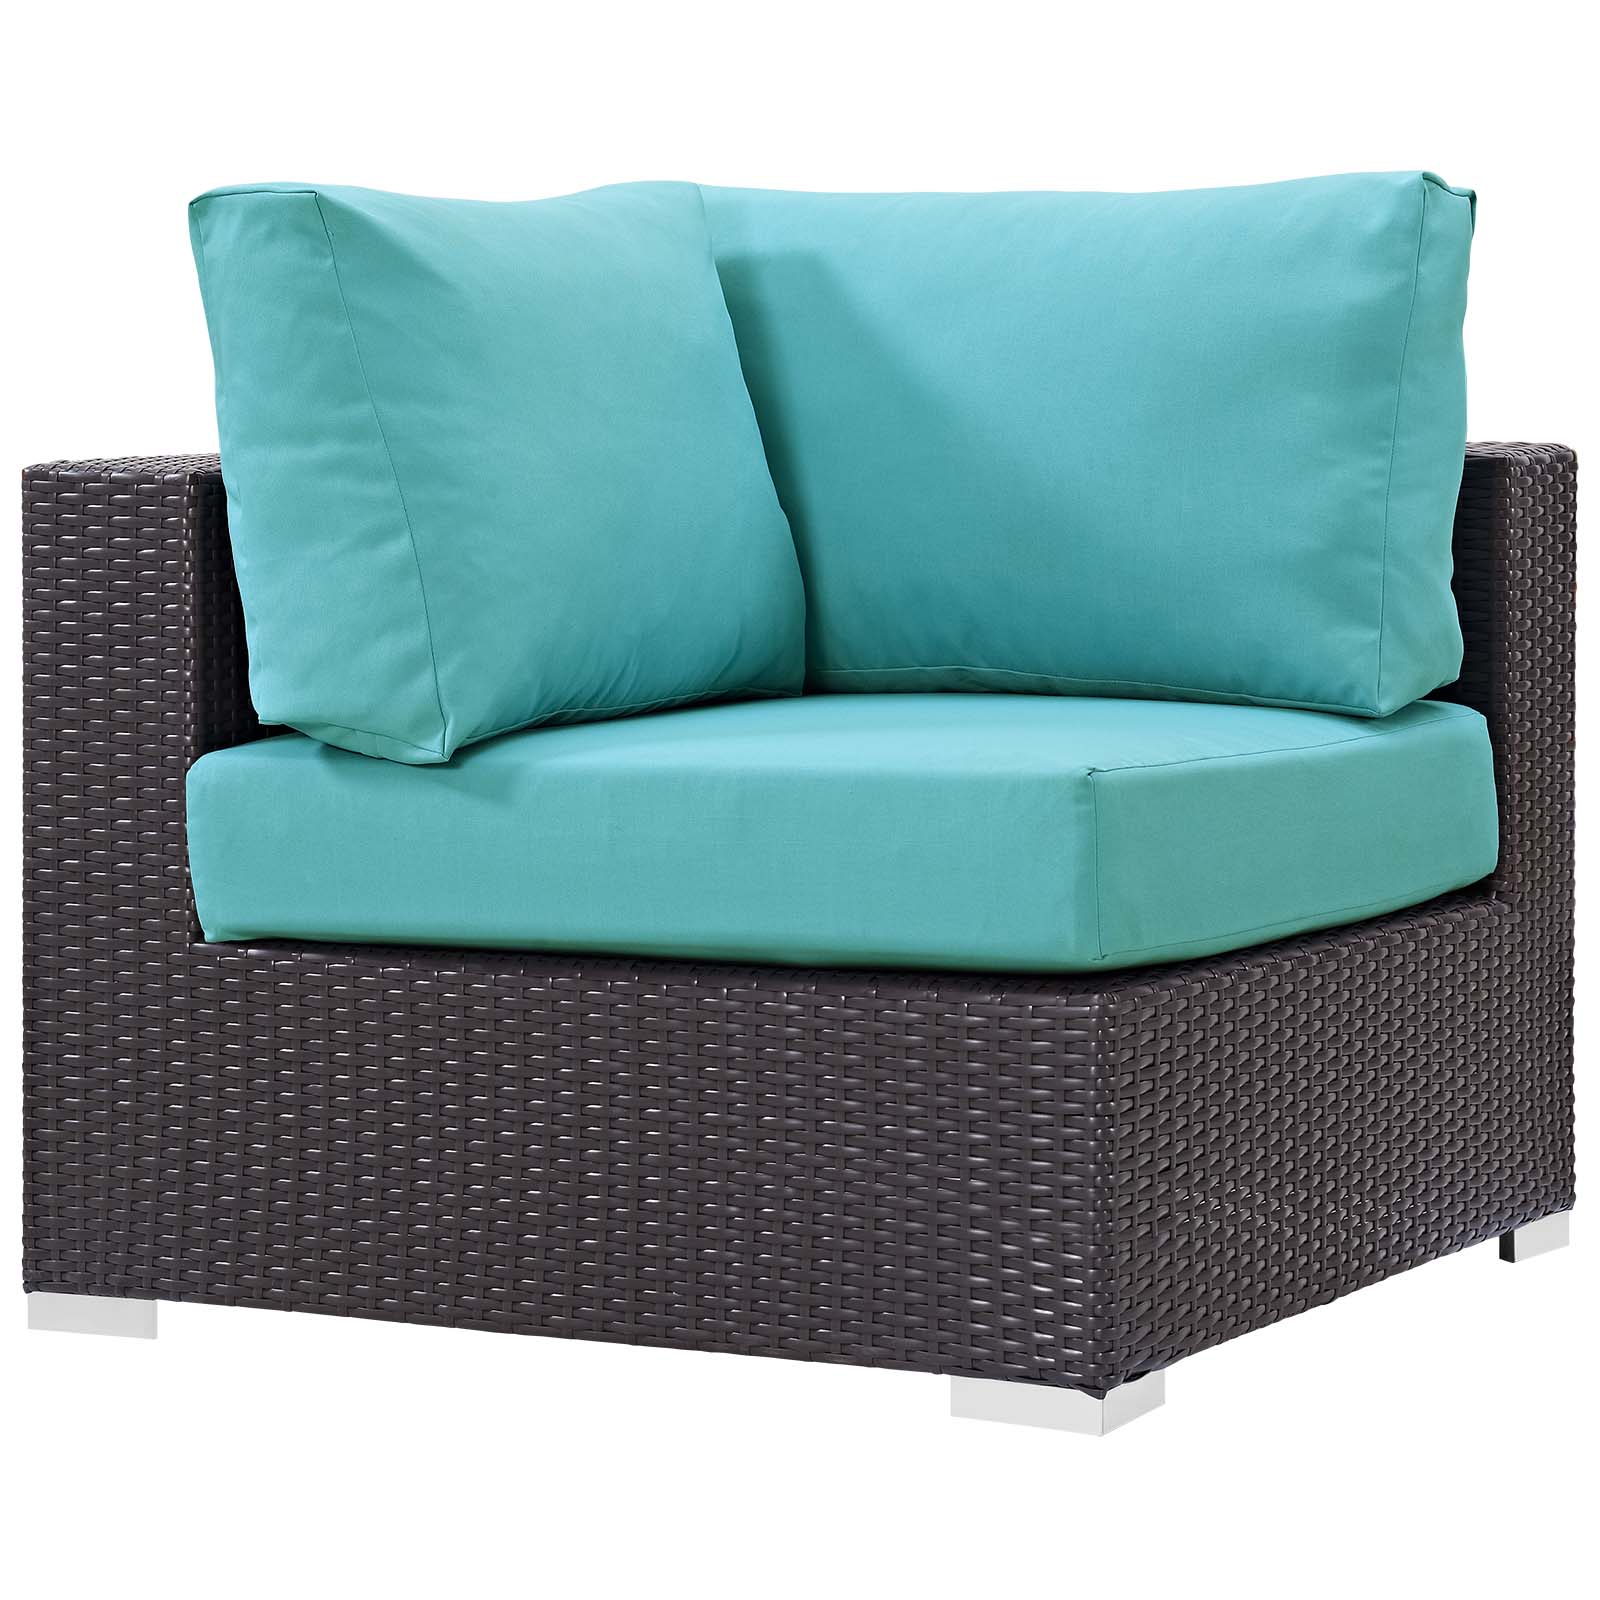 Contemporary Modern Urban Designer Outdoor Patio Balcony Garden Furniture Lounge Sofa, Chair and Coffee Table Fire Pit Set, Fabric Rattan Wicker, Blue - image 4 of 8